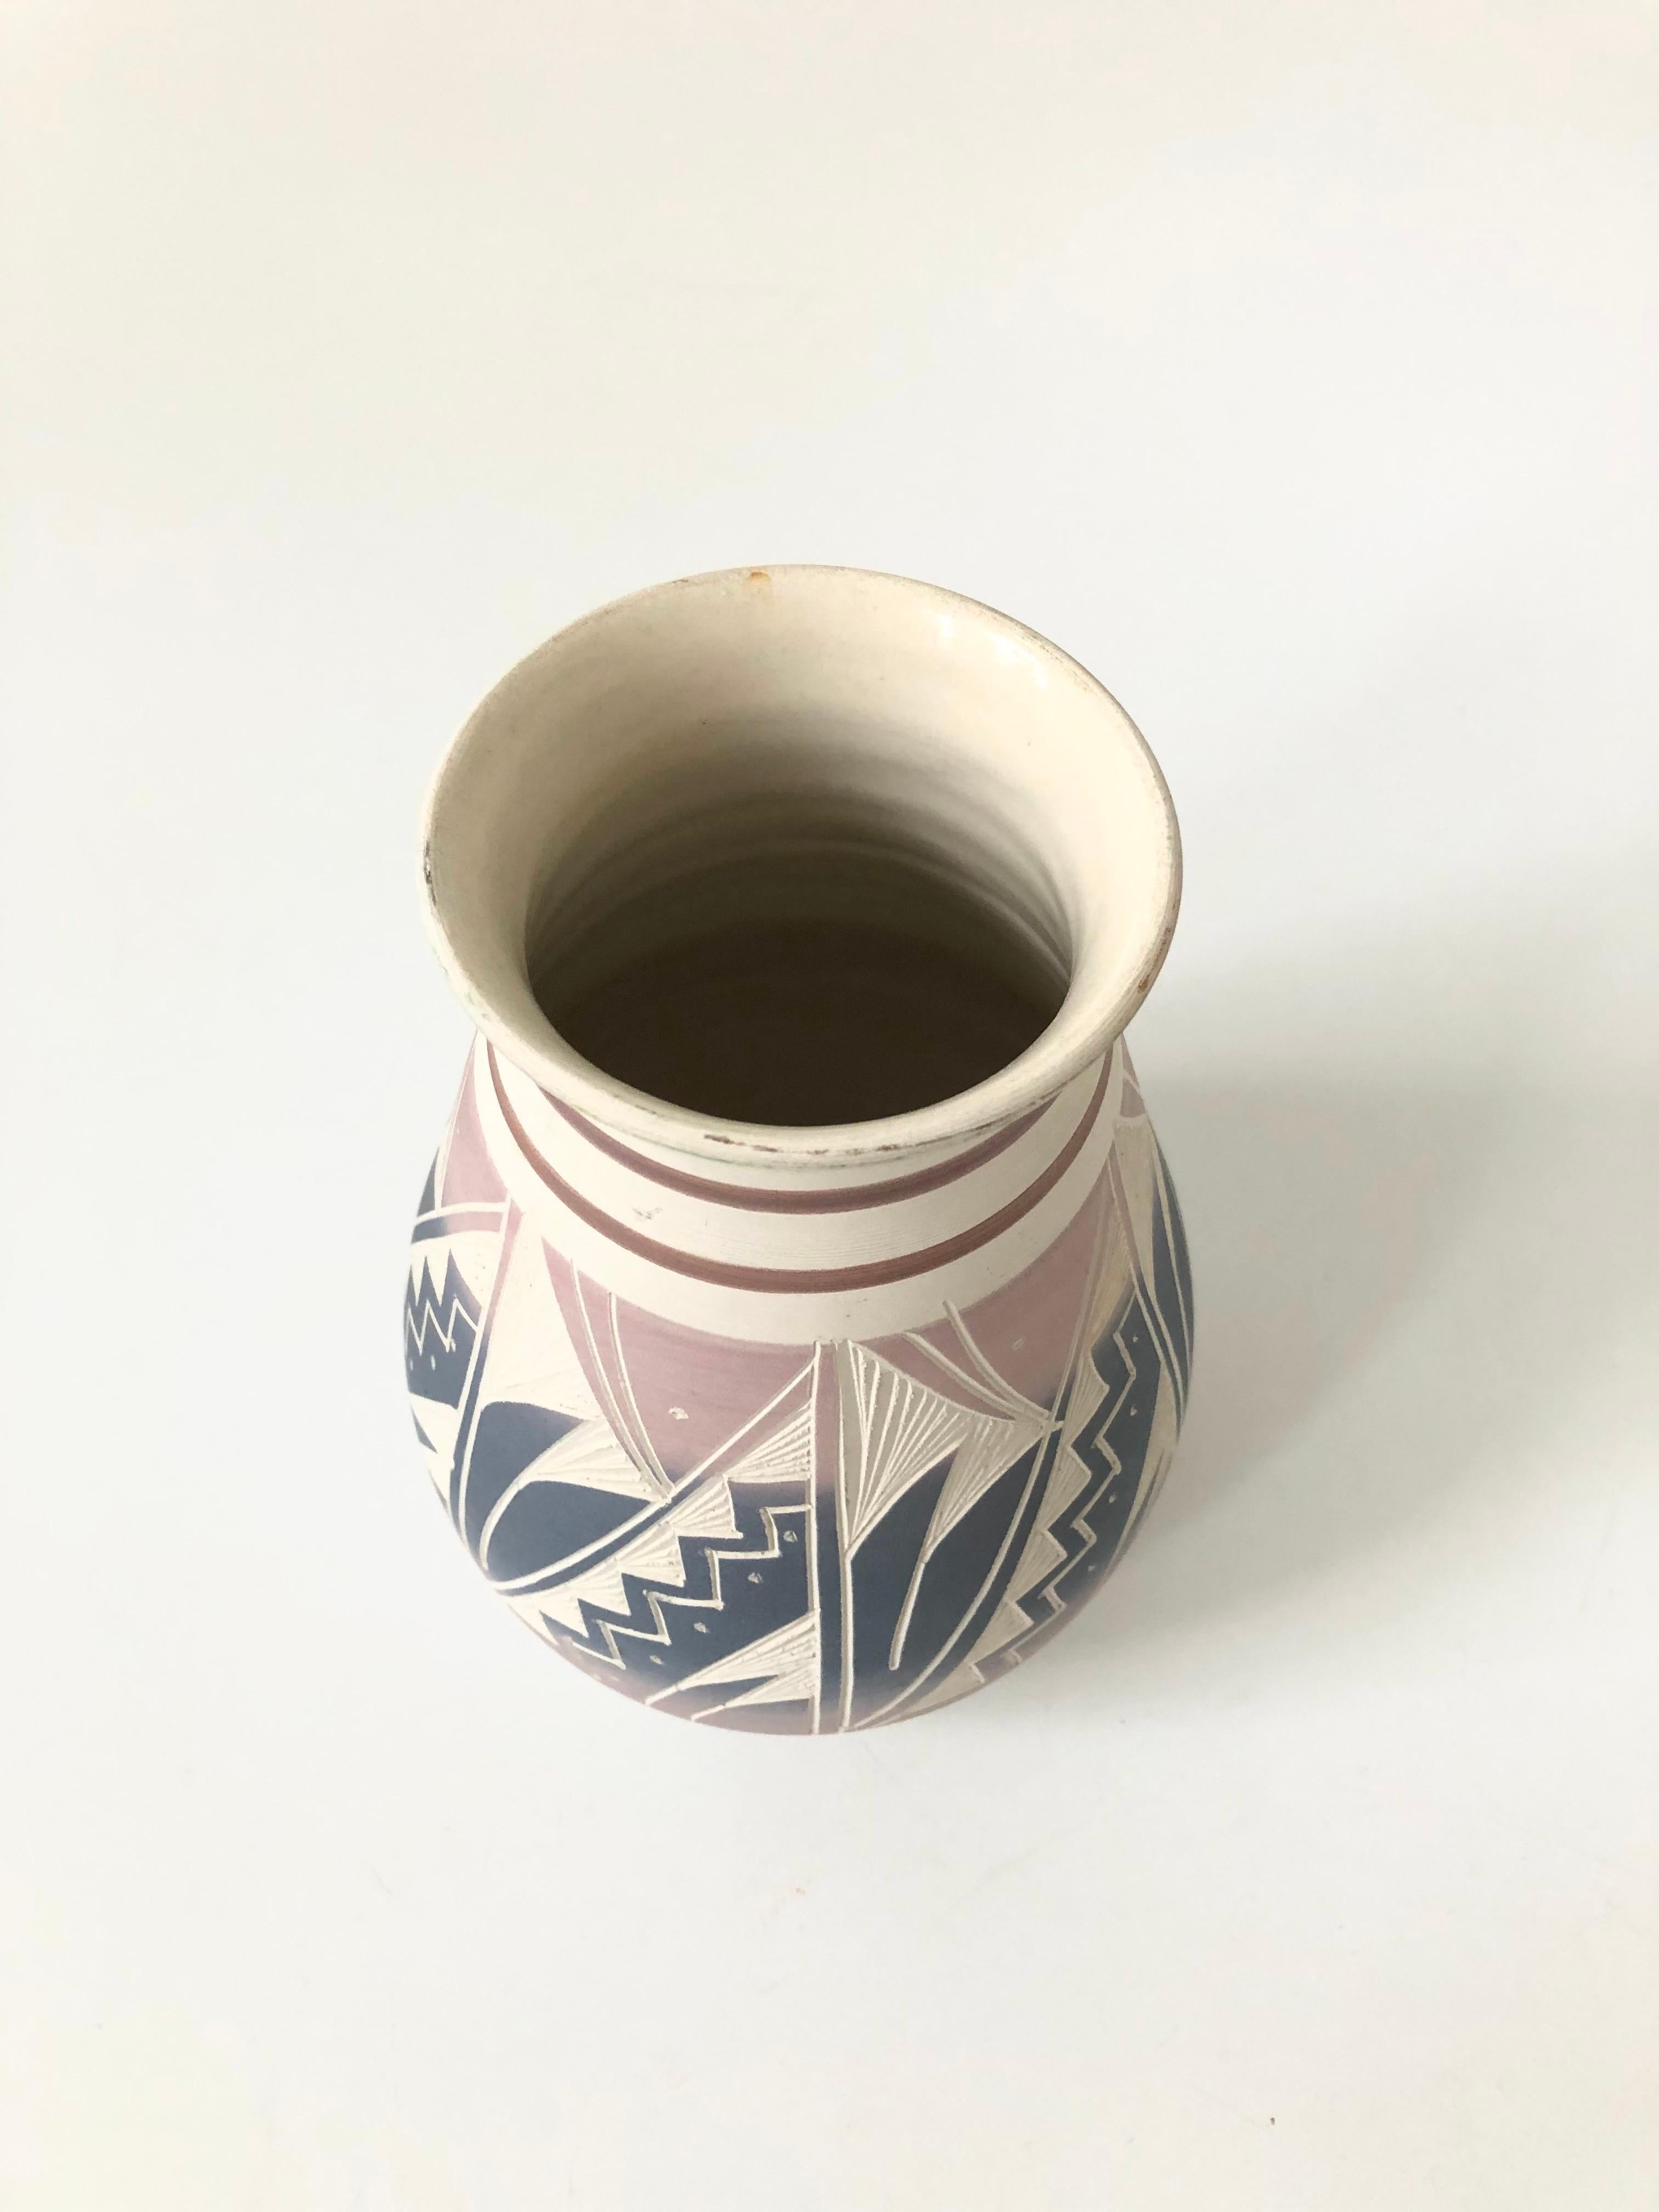 A beautiful vintage hand carved Southwestern pottery vase. Lovely pink and purple glazes over a white base color and a highly detailed geometric pattern that has been hand carved into the sides of the vase. Signed on the base by the maker.
  